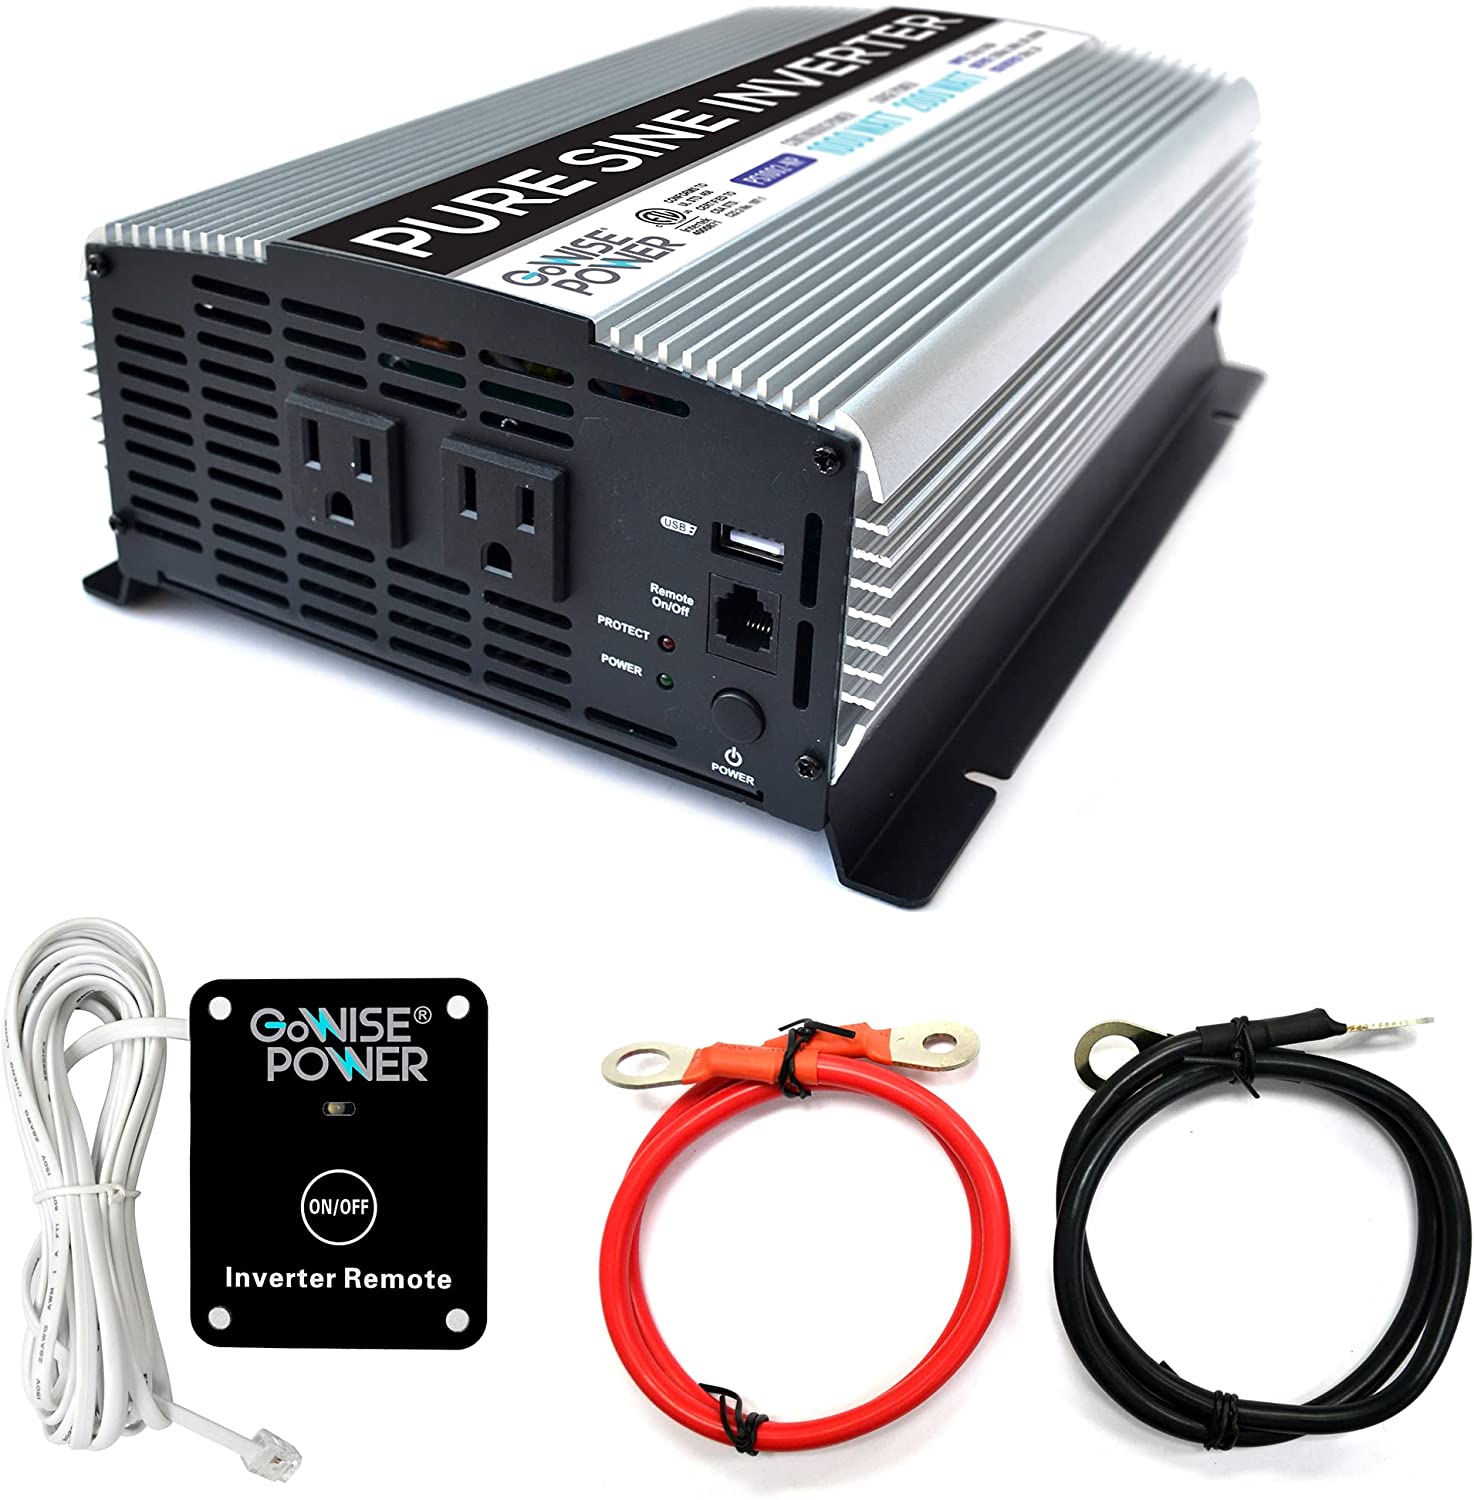 GoWISE Power 1000W Pure Sine Wave Inverter 12V DC to 120V AC with 2 AC Outlets + 1 5V USB Port, 2 Battery Cables, and Remote Switch (2000W Peak) PS1002, Updated Model, Grey, Standard